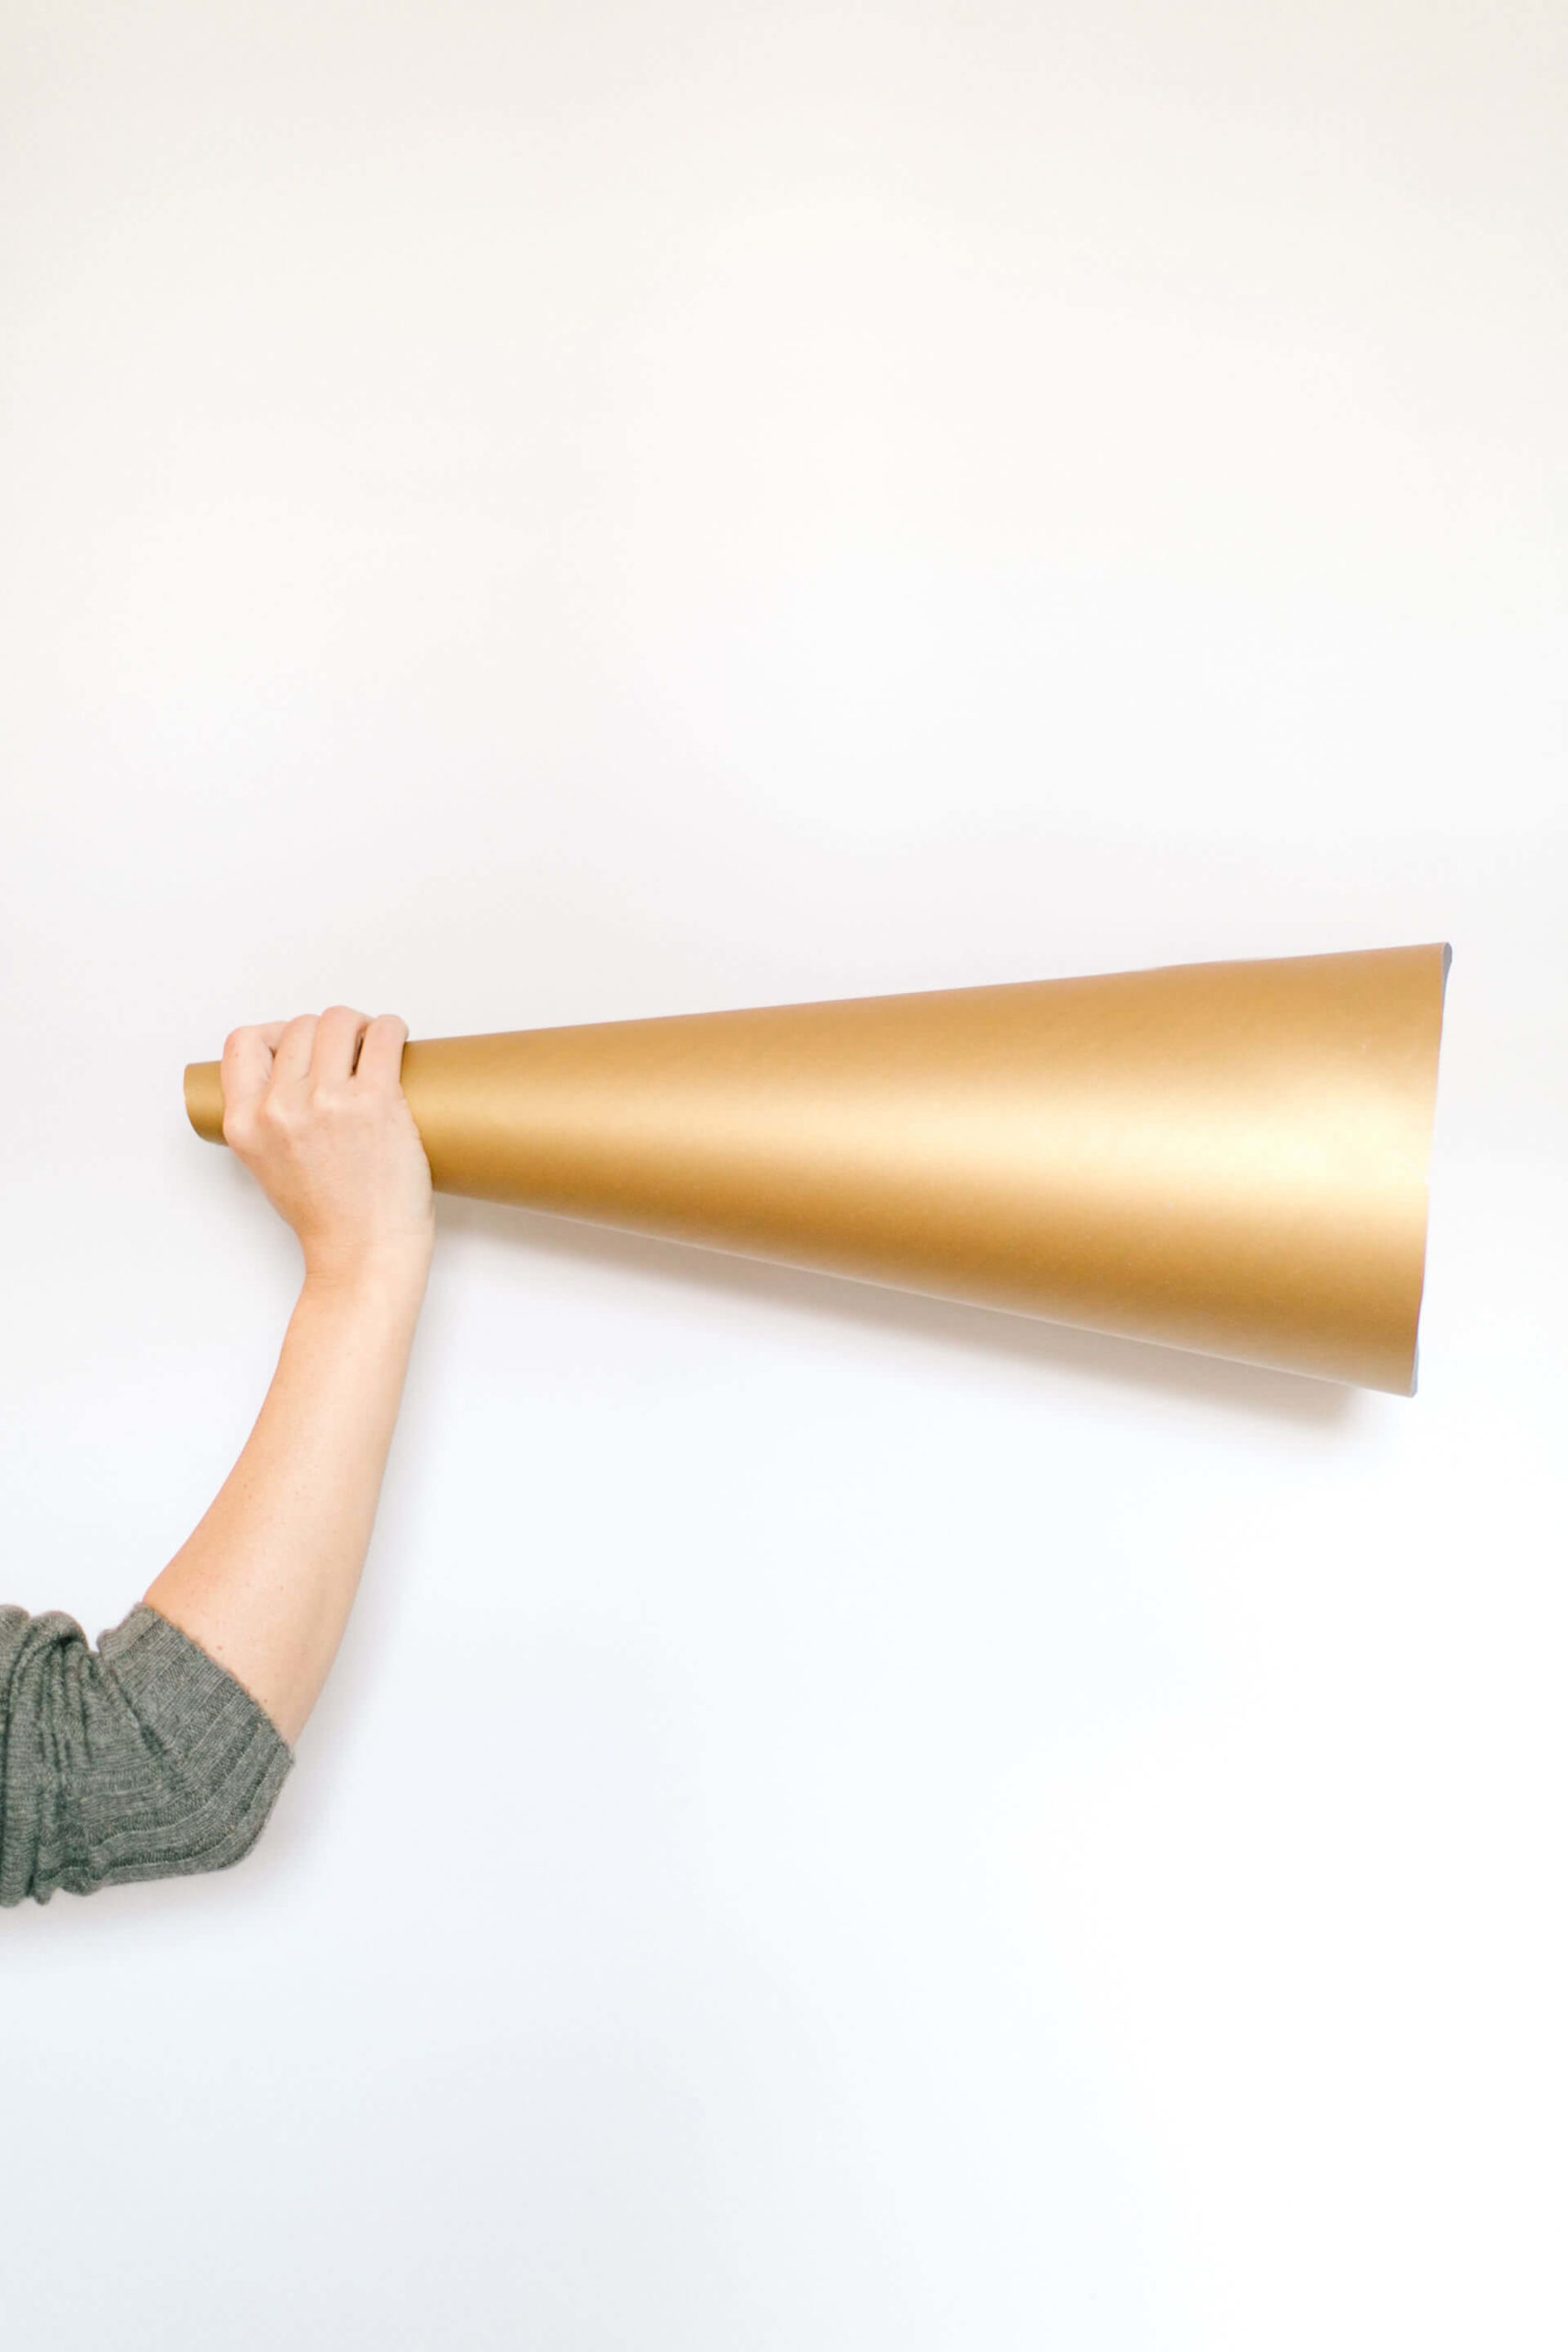 A gold bullhorn: the most important thing you can do for your new business.